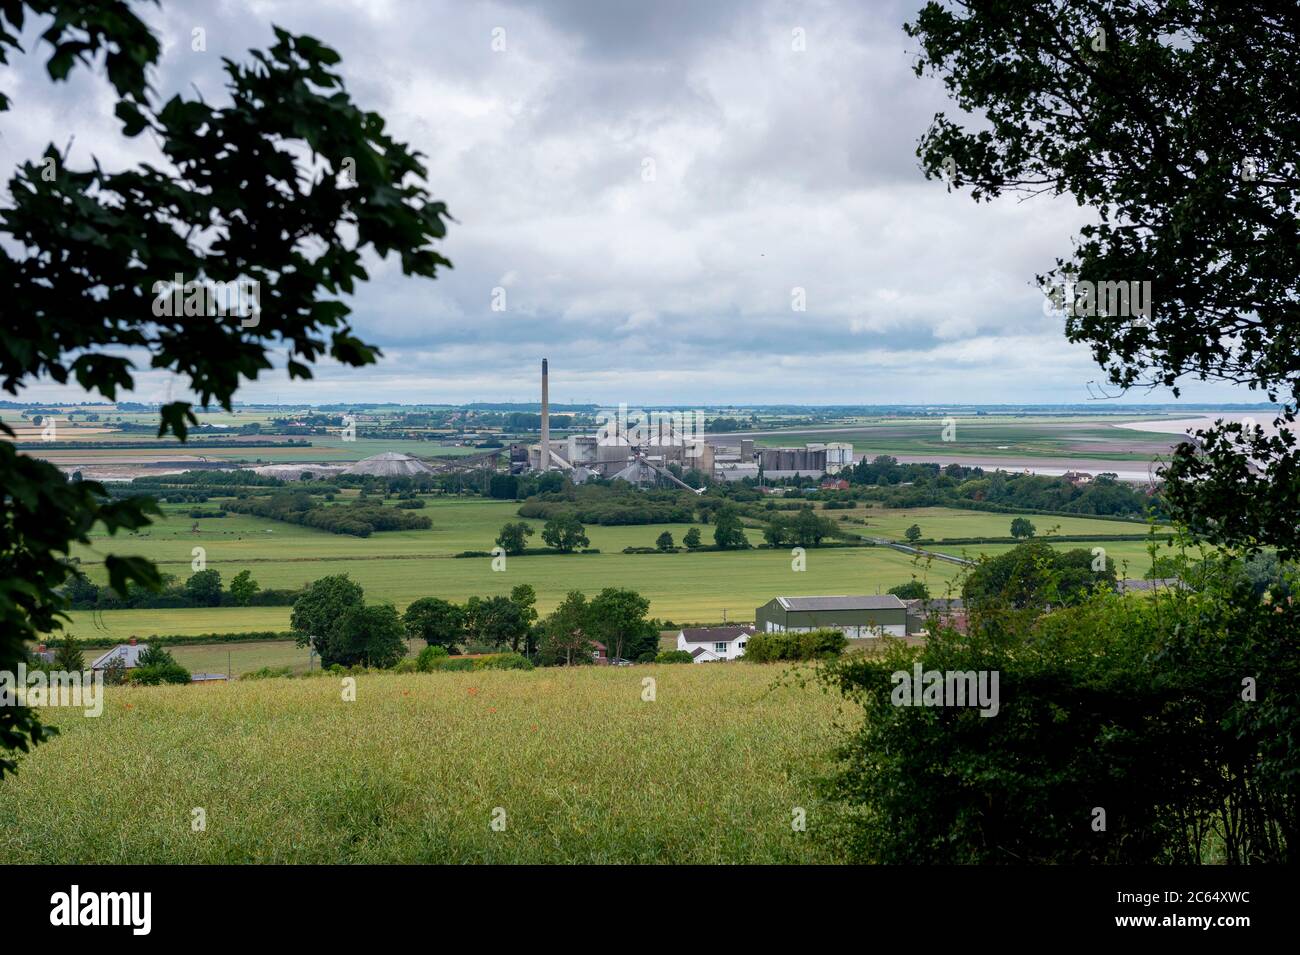 Cemex Cement plant at South Ferriby in North Lincolnshire is beginning its shutdown procedure to mothball the plant. Shown nestled in the countryside. Stock Photo